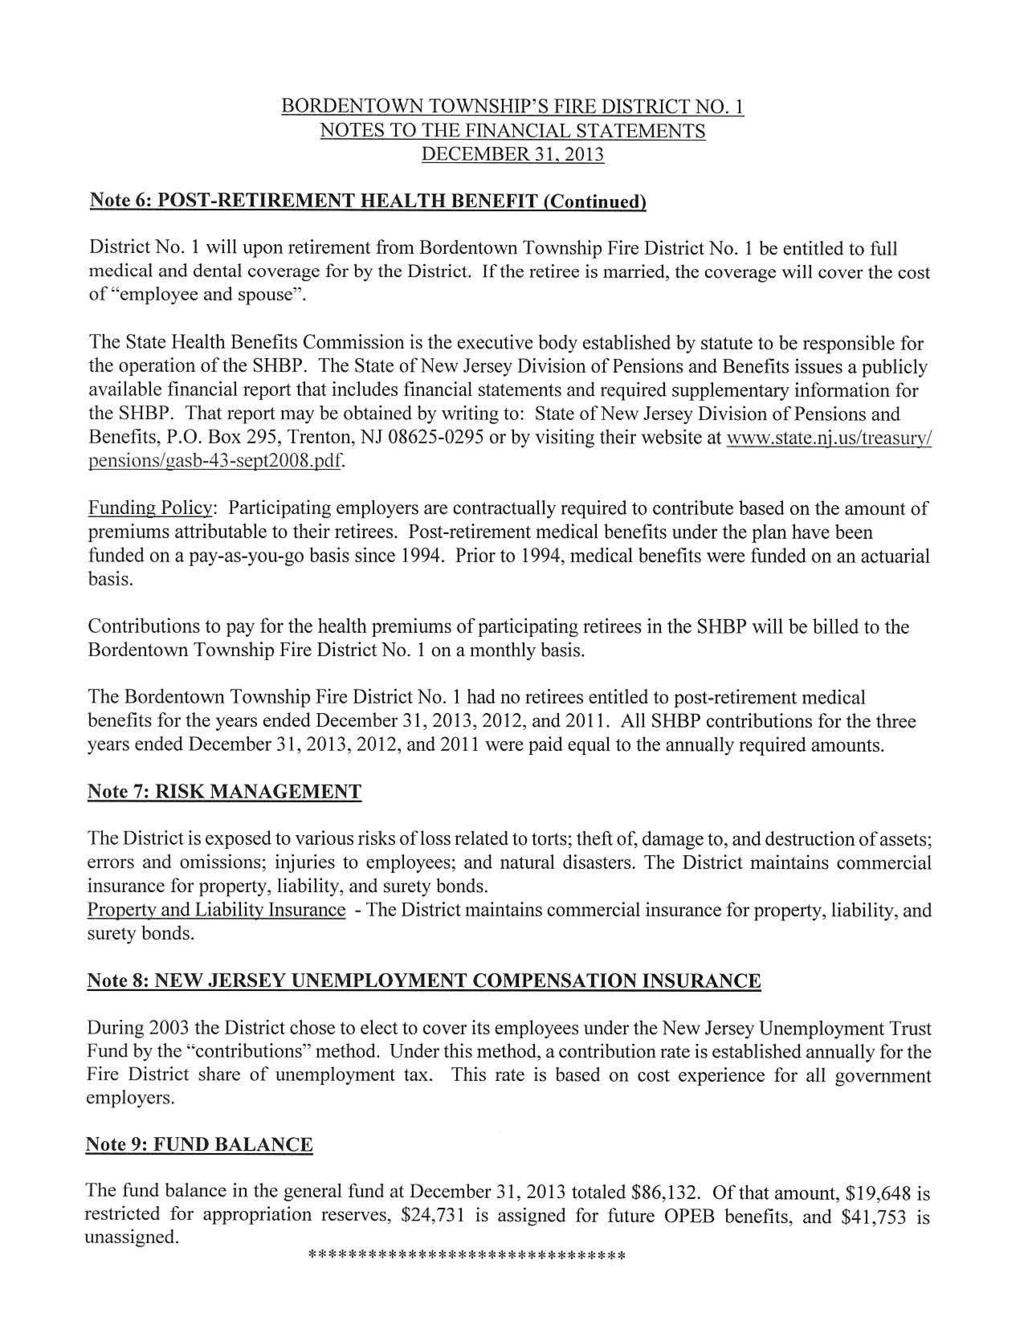 BORDENTOWN TOWNSHIP'S FIRE DISTRICT NO. I NOTES TO THE FINANCIAL STATEMENTS DECEMBER 31, 2013 Note 6: POST-RETIREMENT HEALTH BENEFIT (Continued) District No.